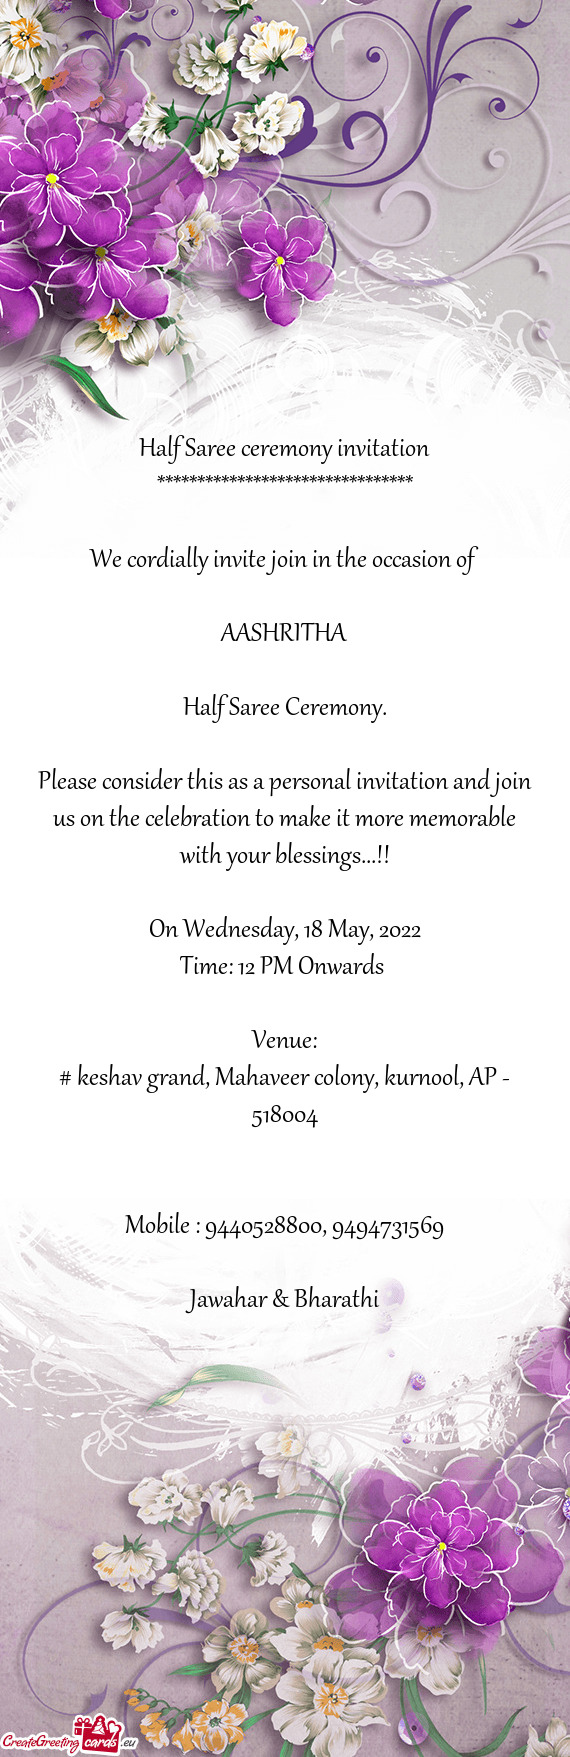 We cordially invite join in the occasion of